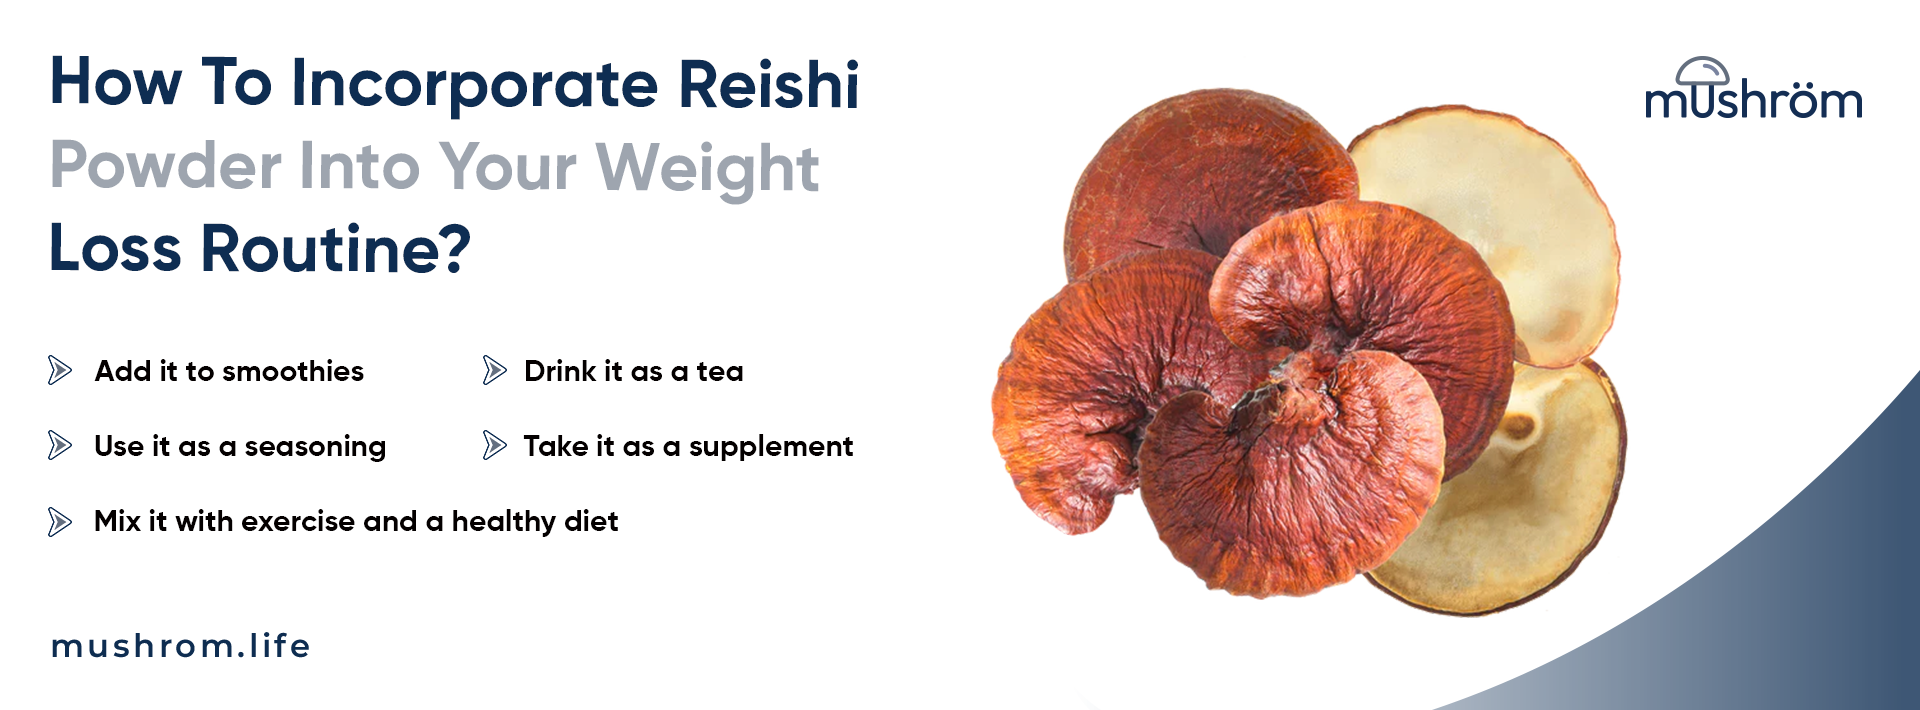 How To Incorporate Reishi Powder Into Your Weight Loss Routine